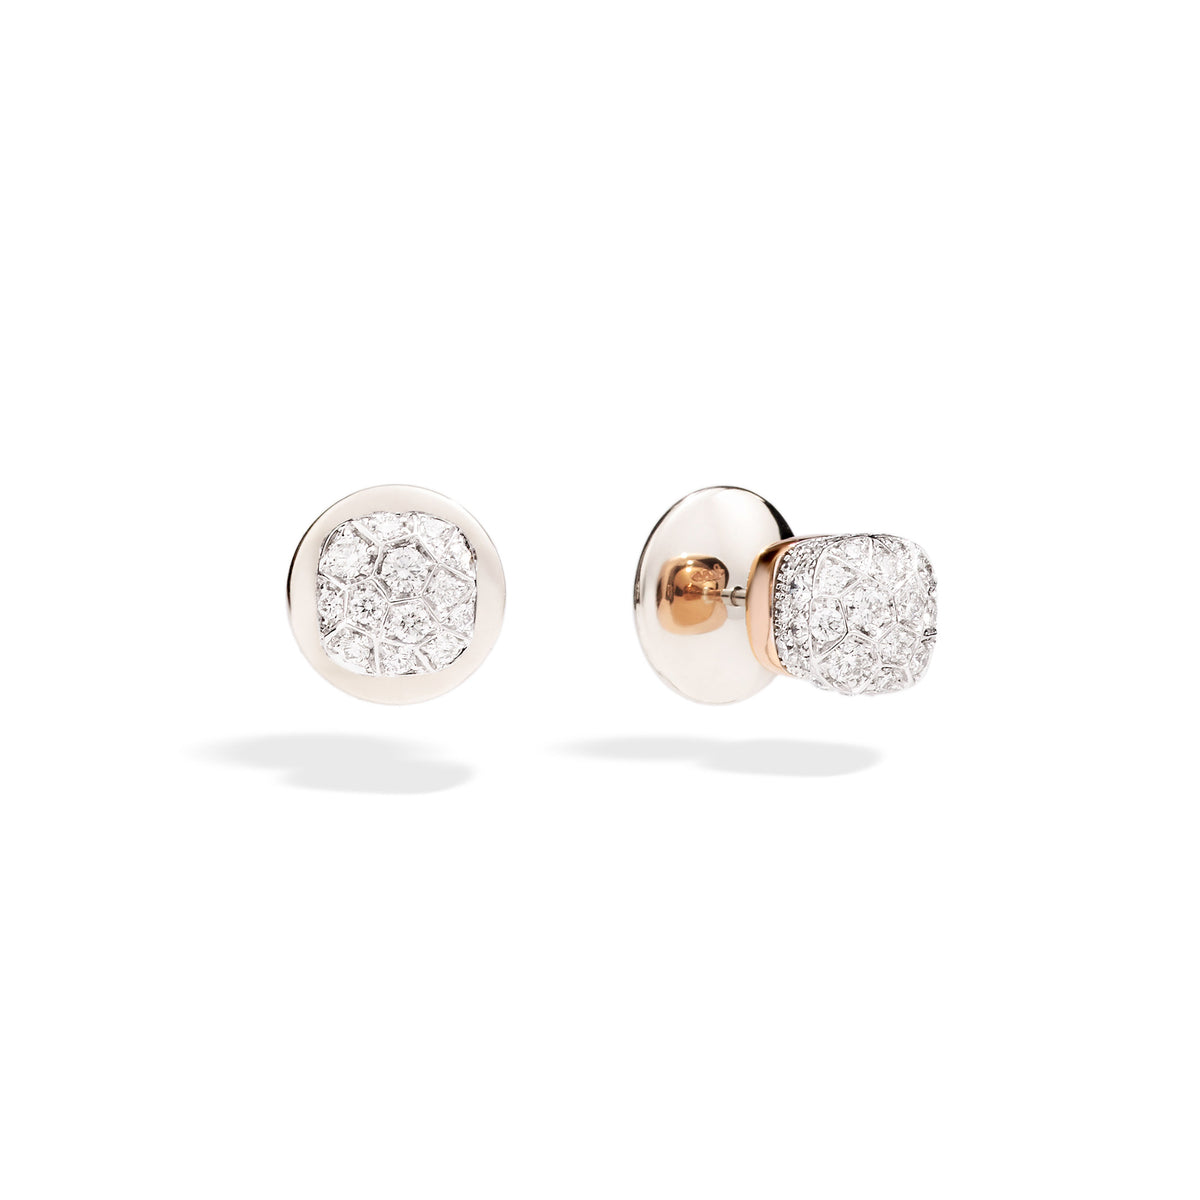 Nudo Petit Stud Earrings in 18k Rose and White Gold with Diamonds - Orsini Jewellers NZ